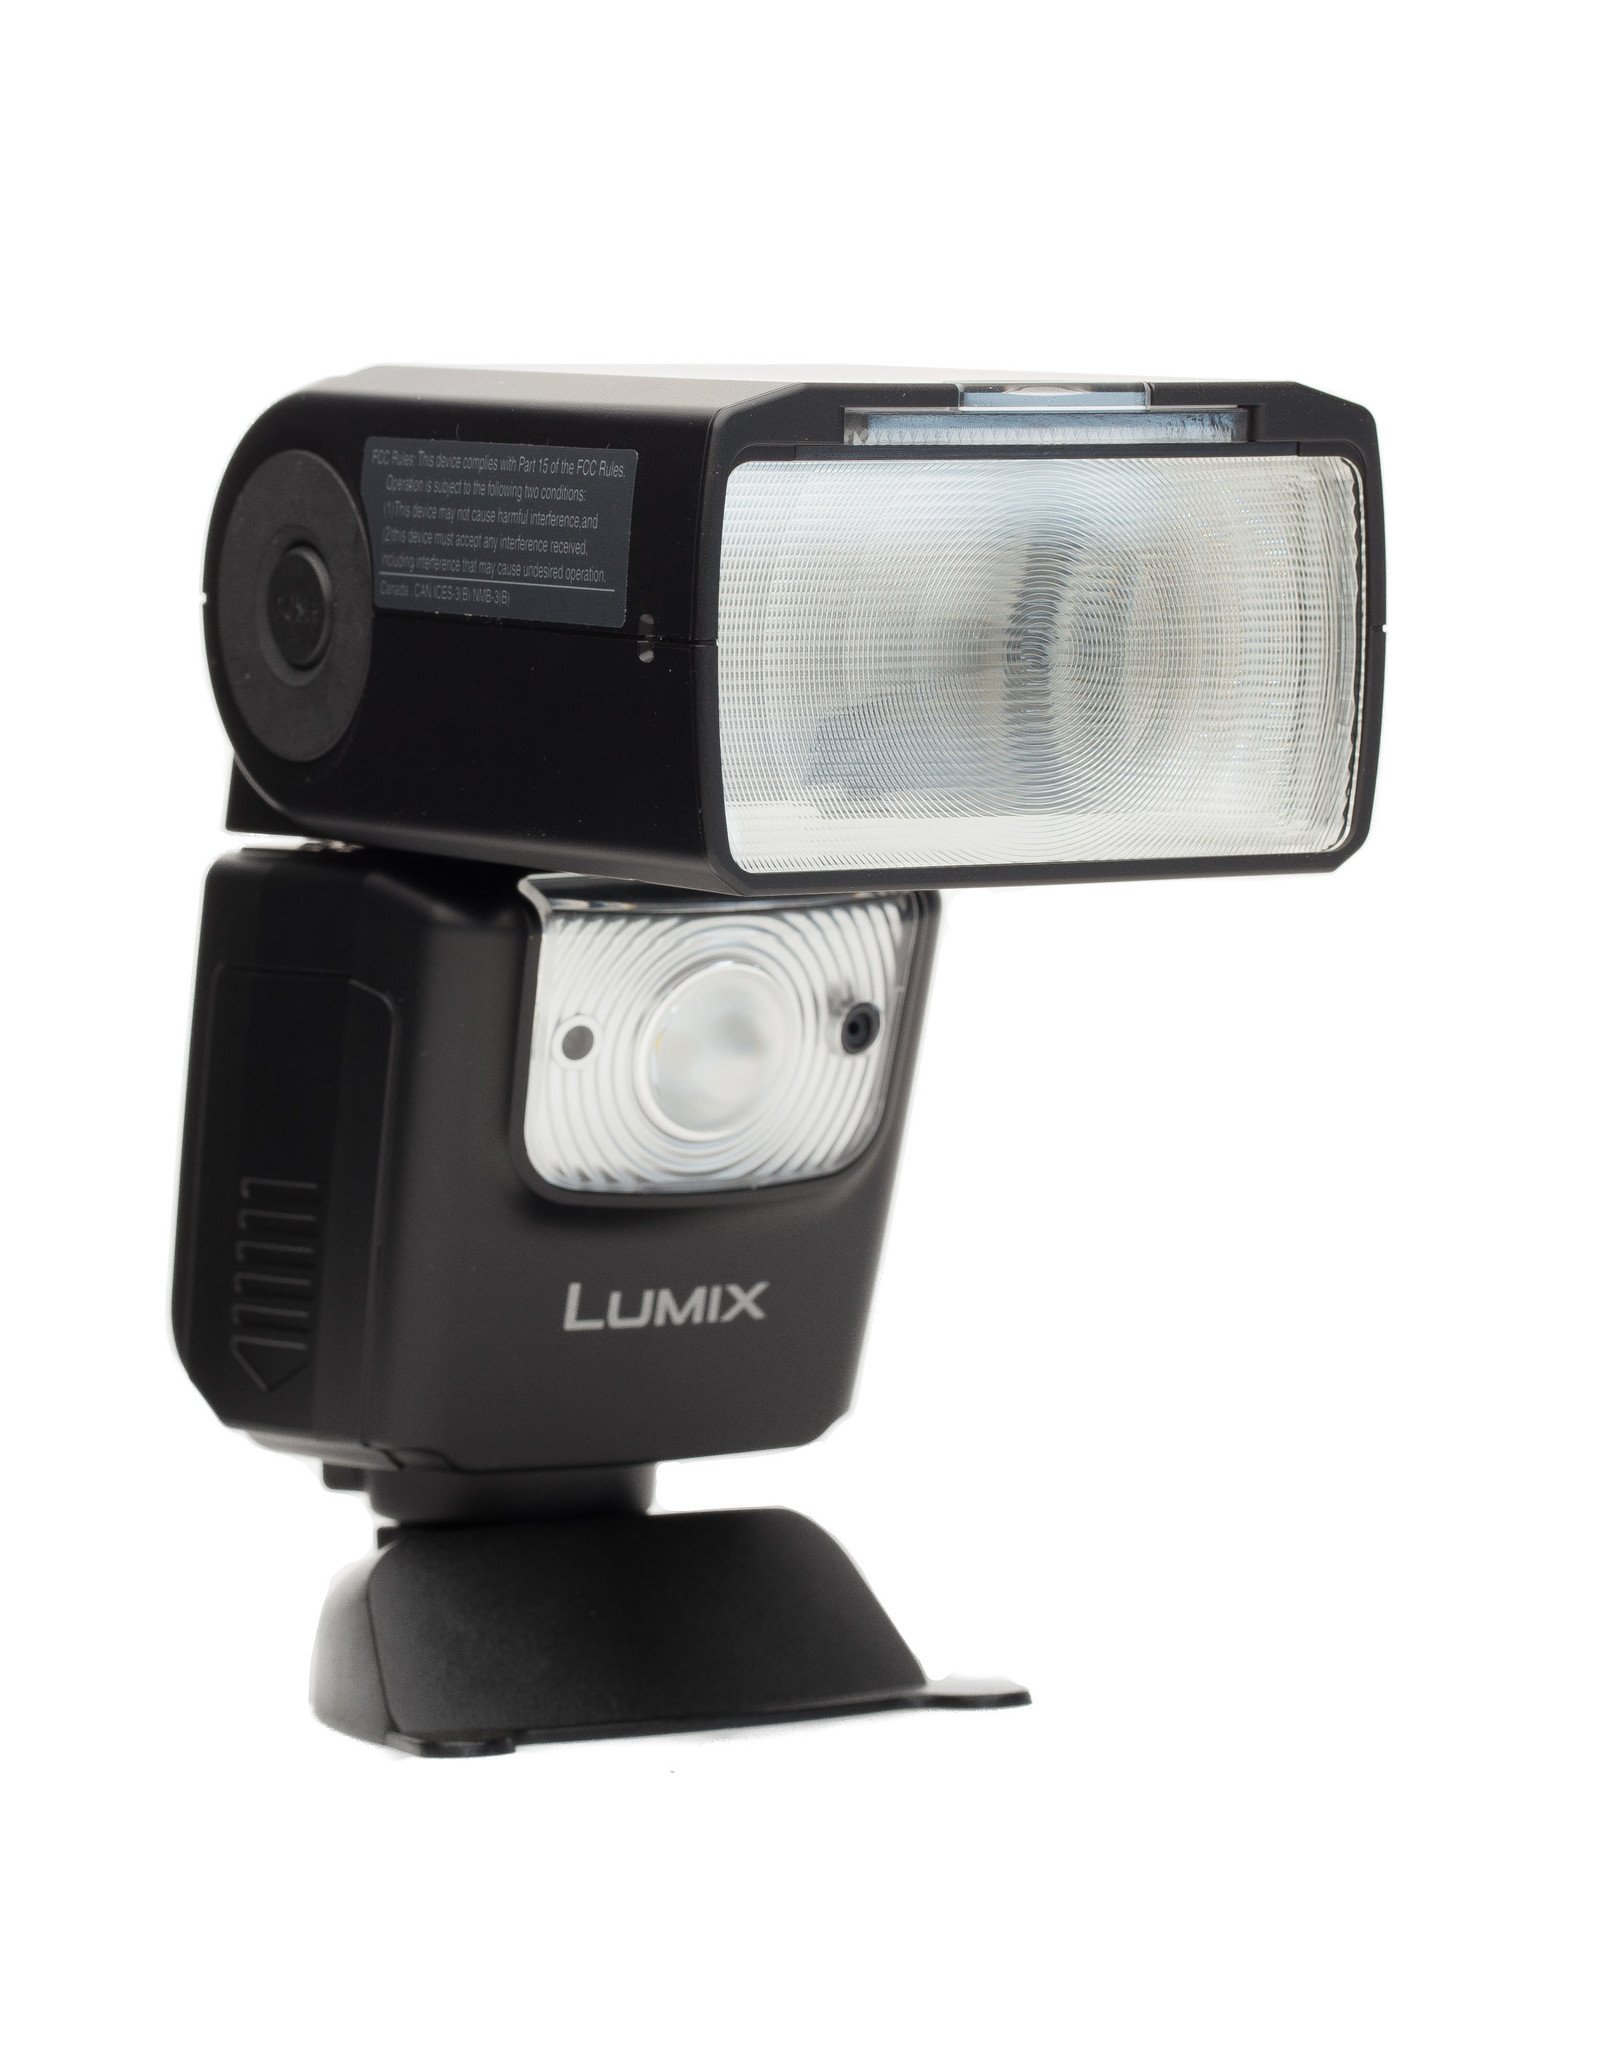 Panasonic Panasonic DMW-FL580L Flash for Digital Cameras, Wireless Channels, Hybrid Flash System with Built-in Video LED